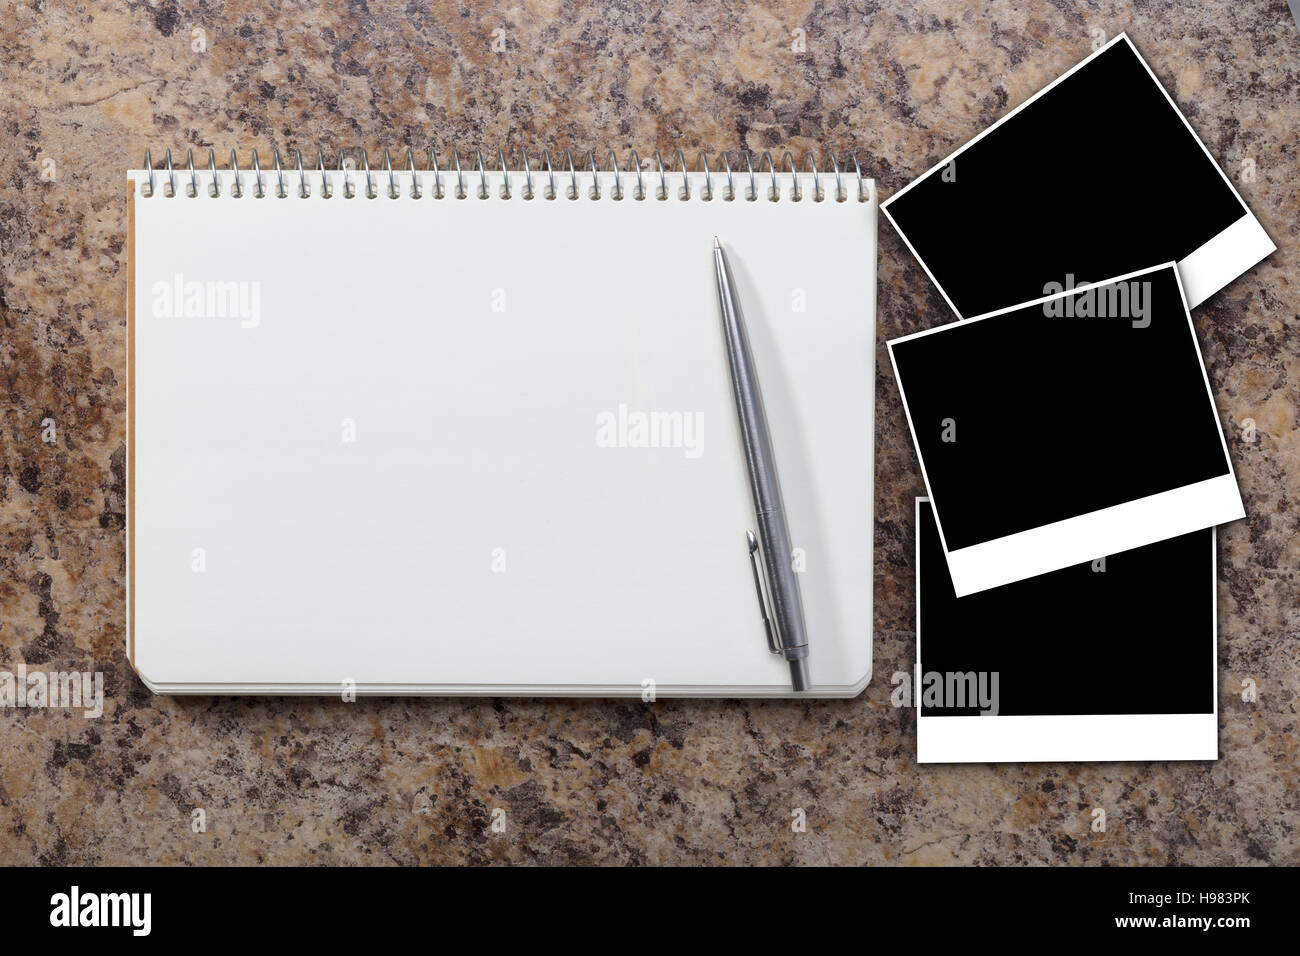 Notebook with empty photograph on a granite background Stock Photo